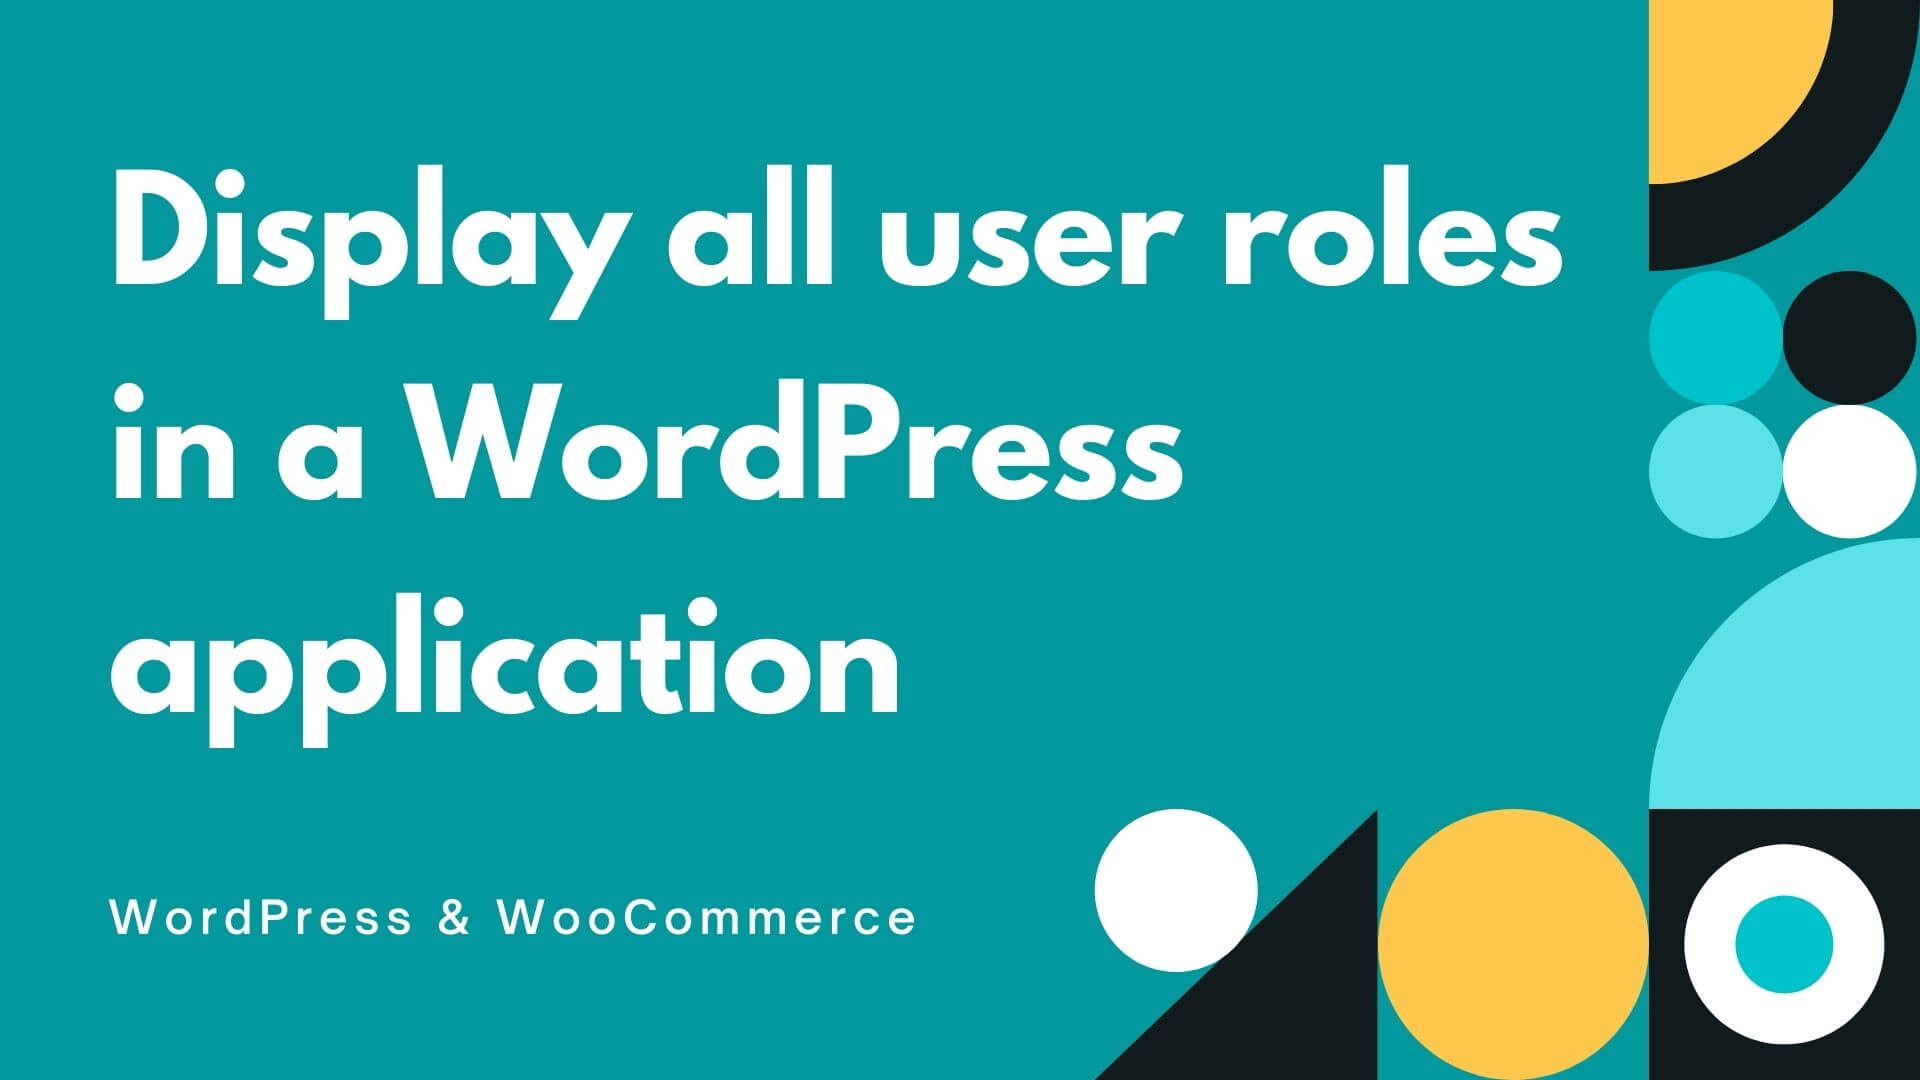 Display all user roles in a WordPress application